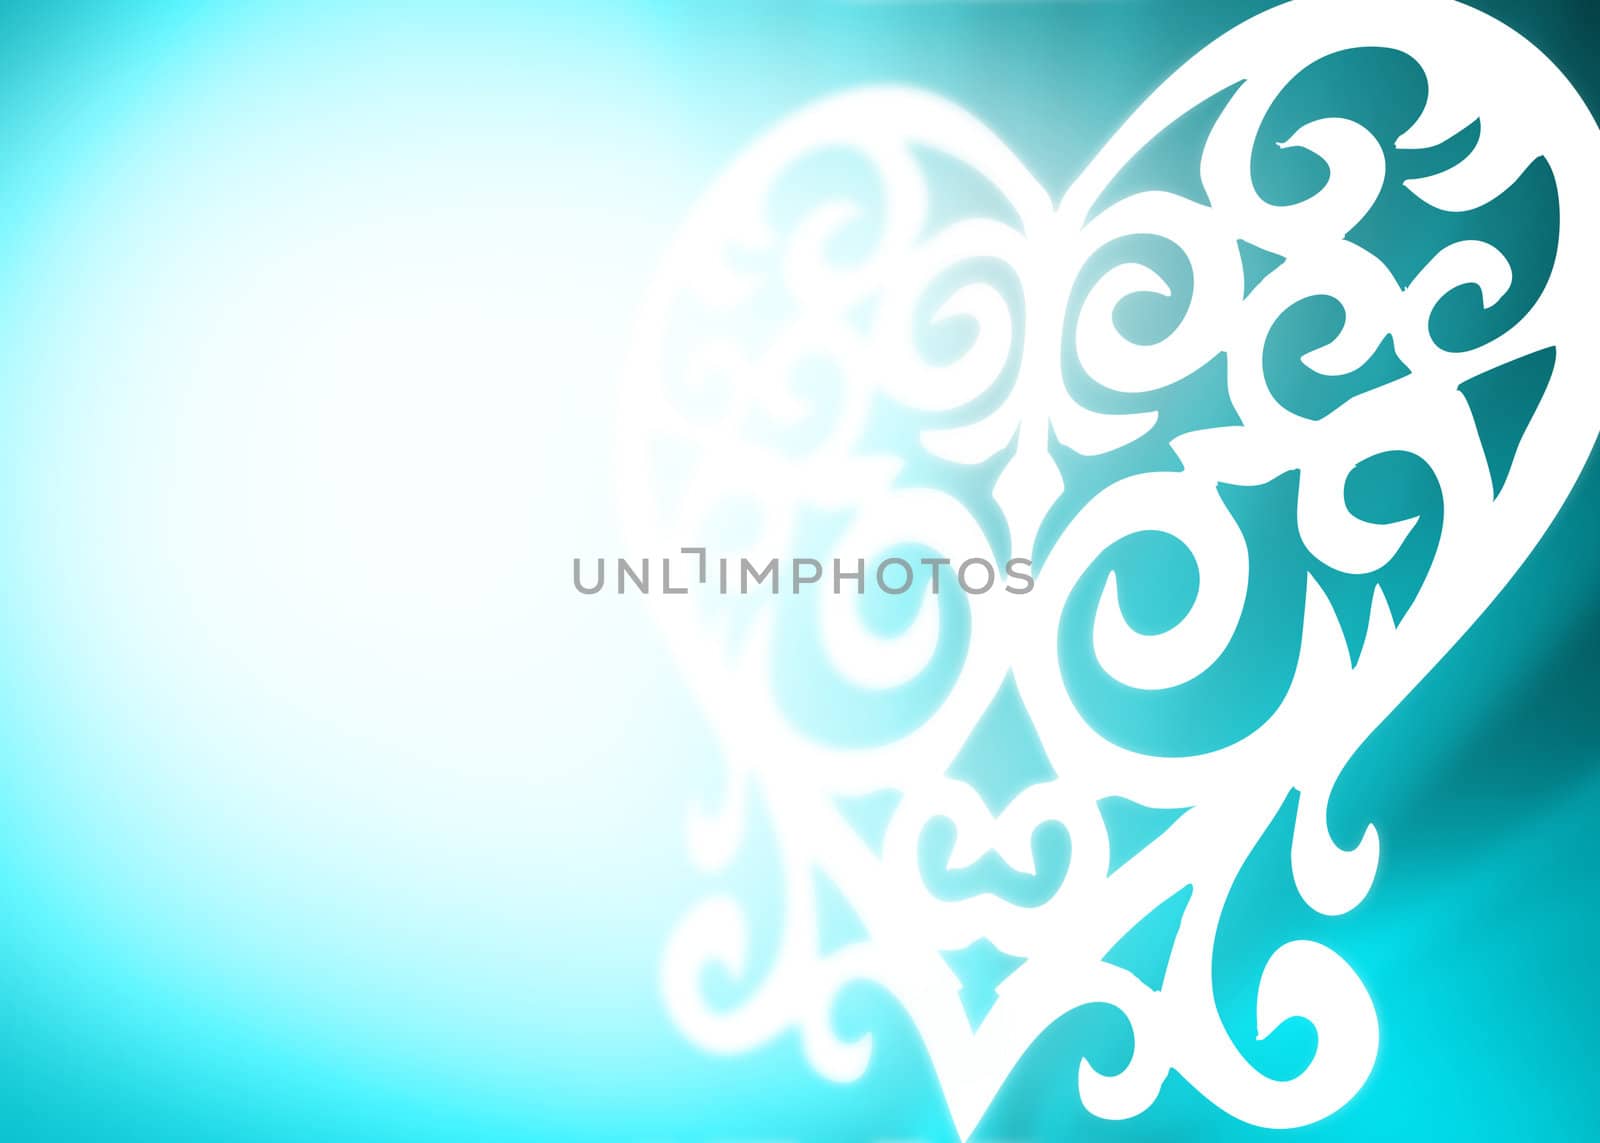 the heart of the white paper on a blue background